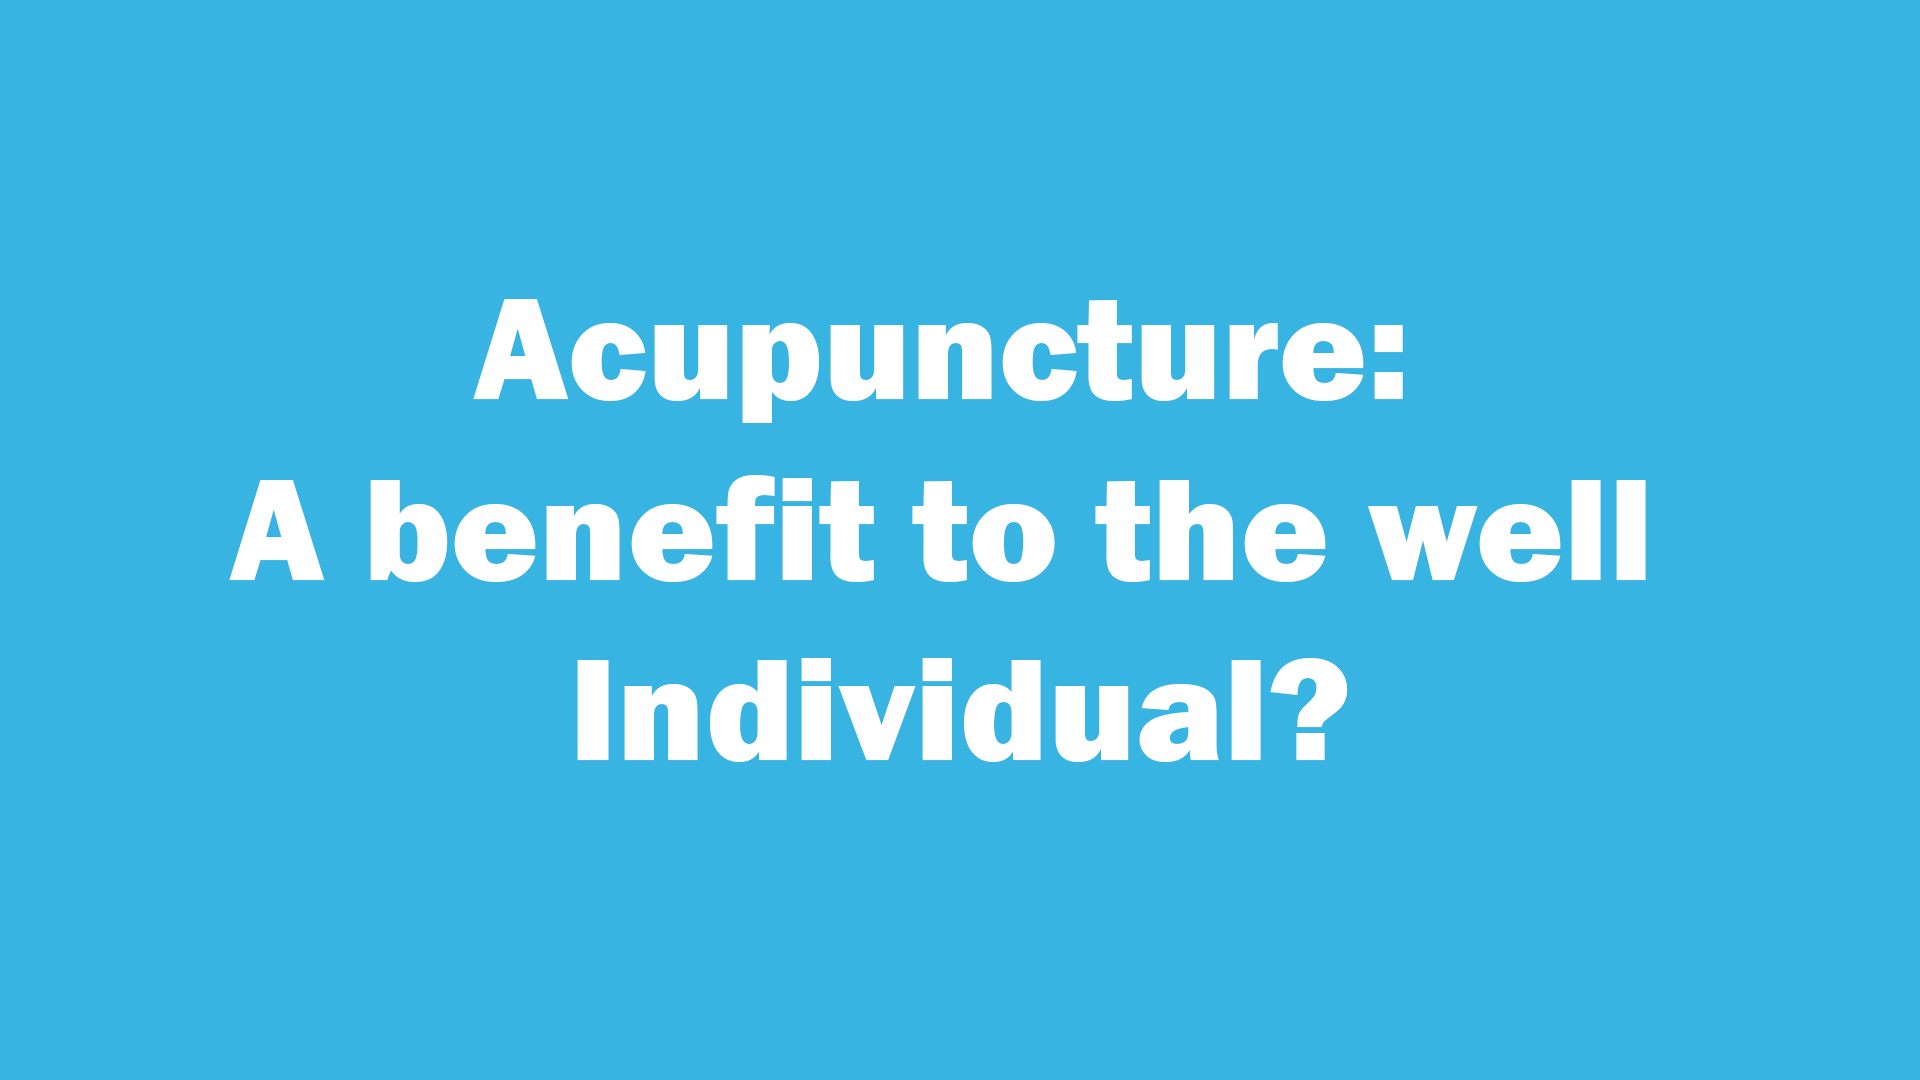 Acupuncture: A benefit to the well Individual?